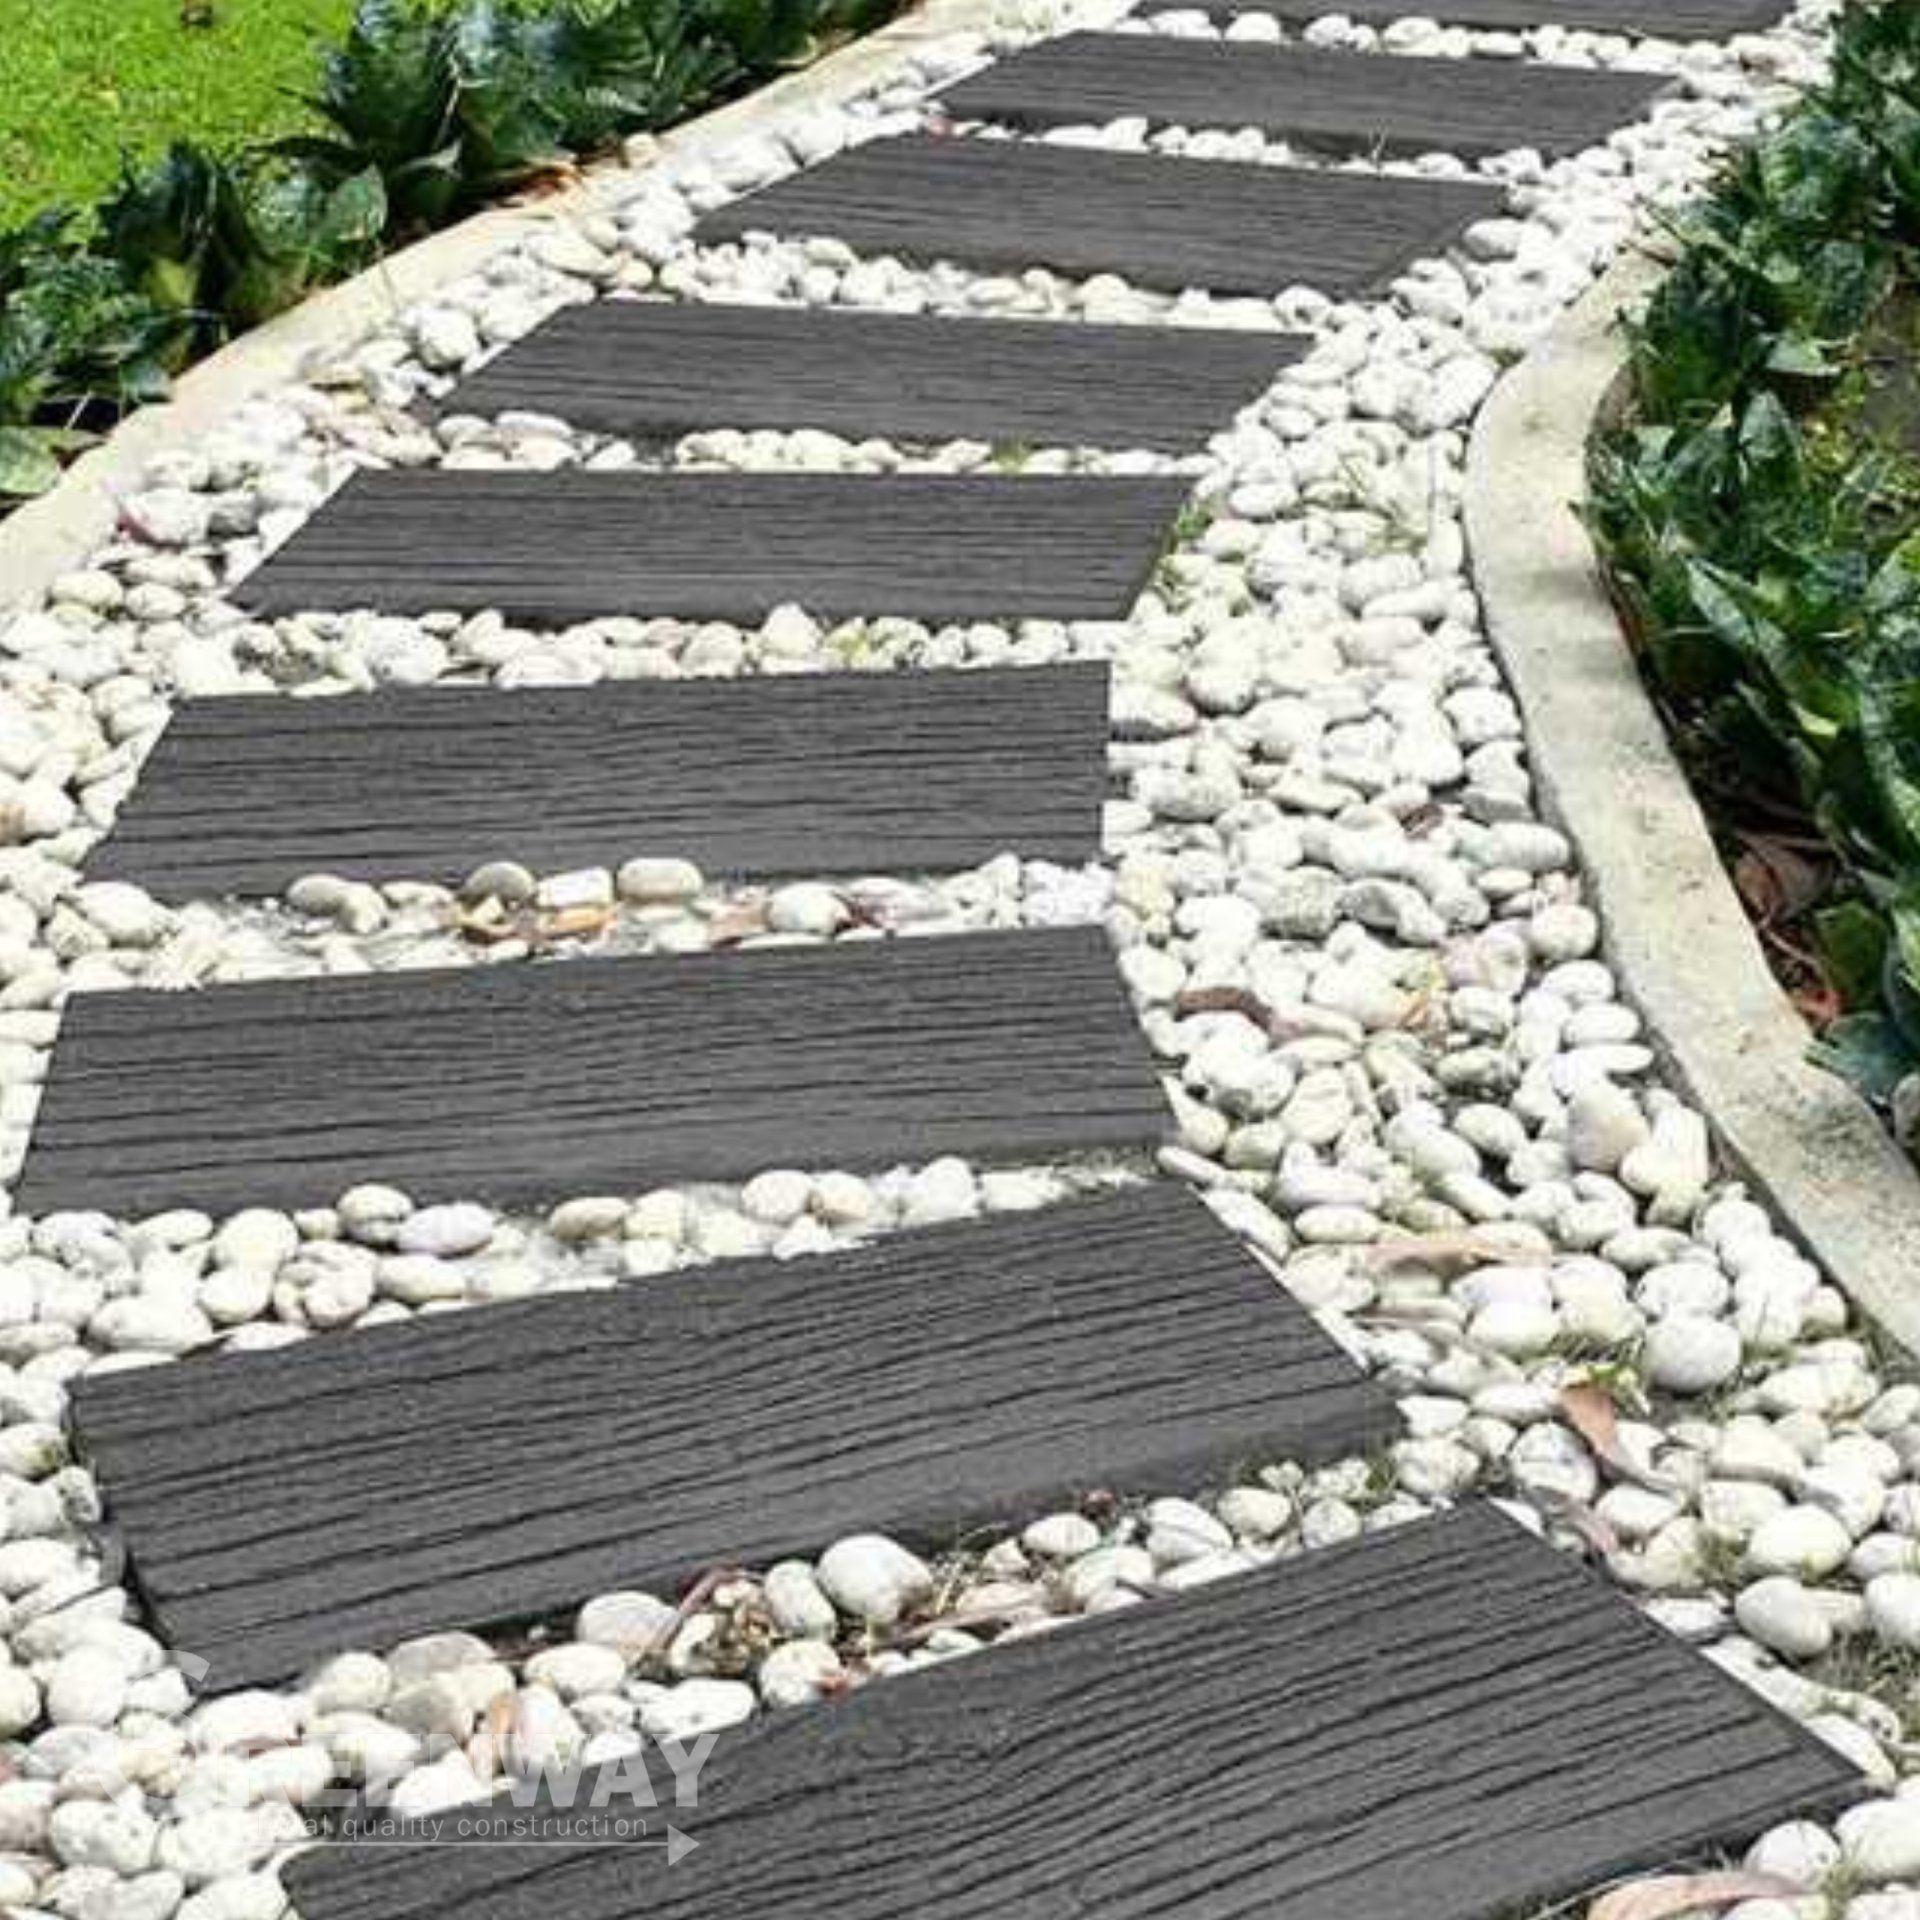 Recycled Rubber Pathways